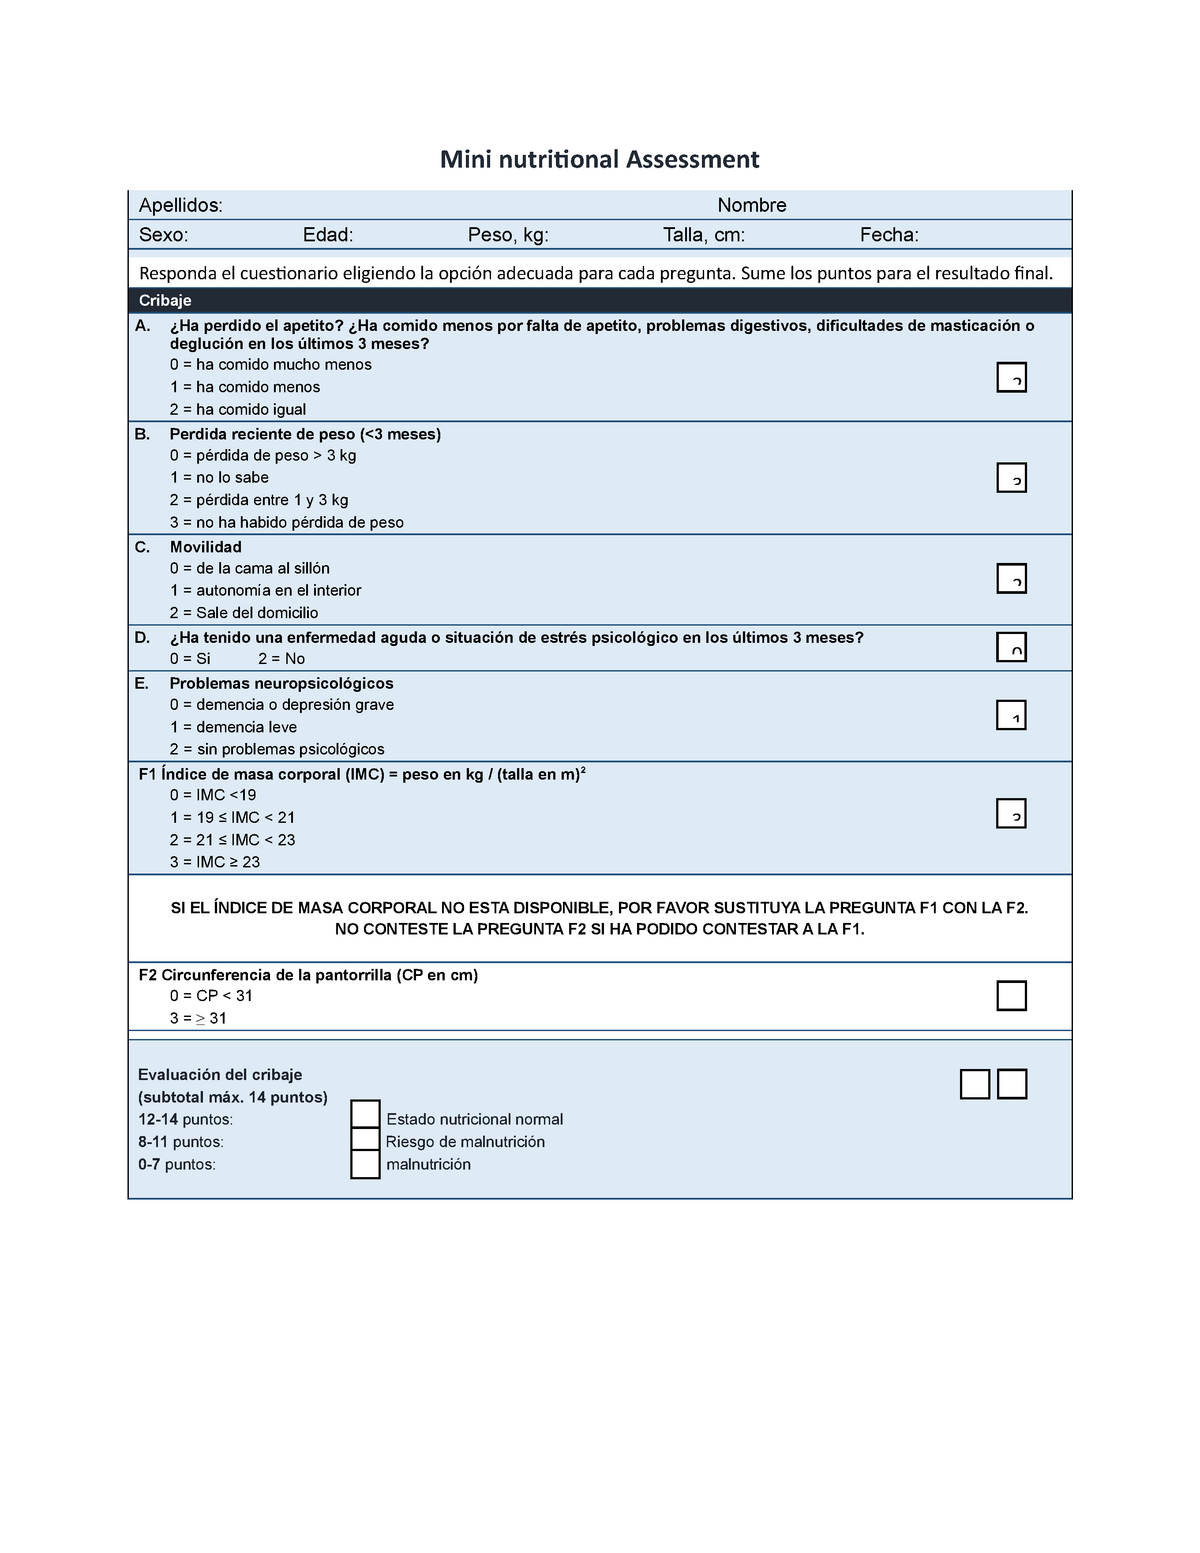 mini-nutritional-assessment-form-fill-out-and-sign-printable-pdf-gambaran